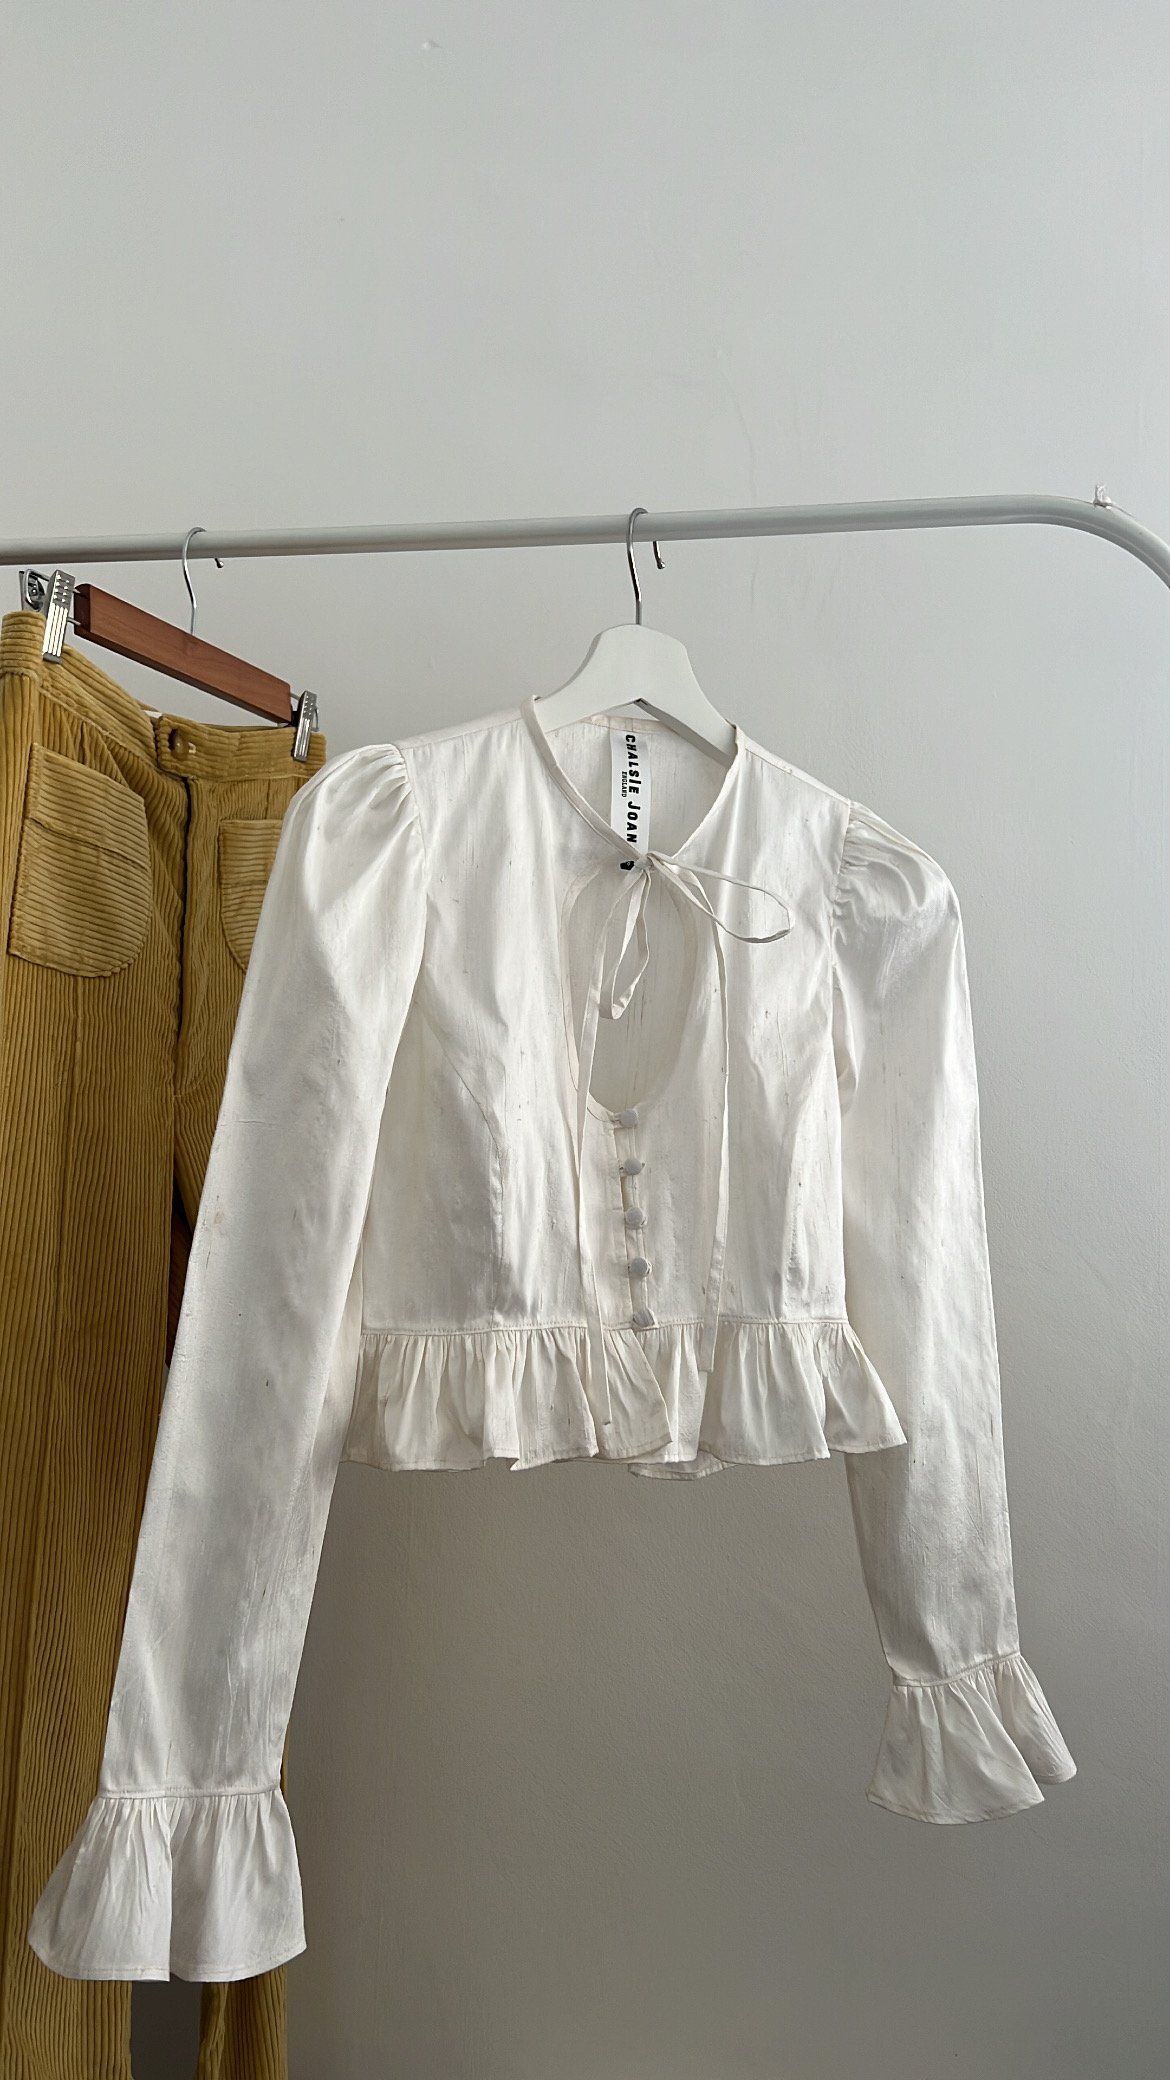 White Blouses: Effortless Elegance for Any Occasion